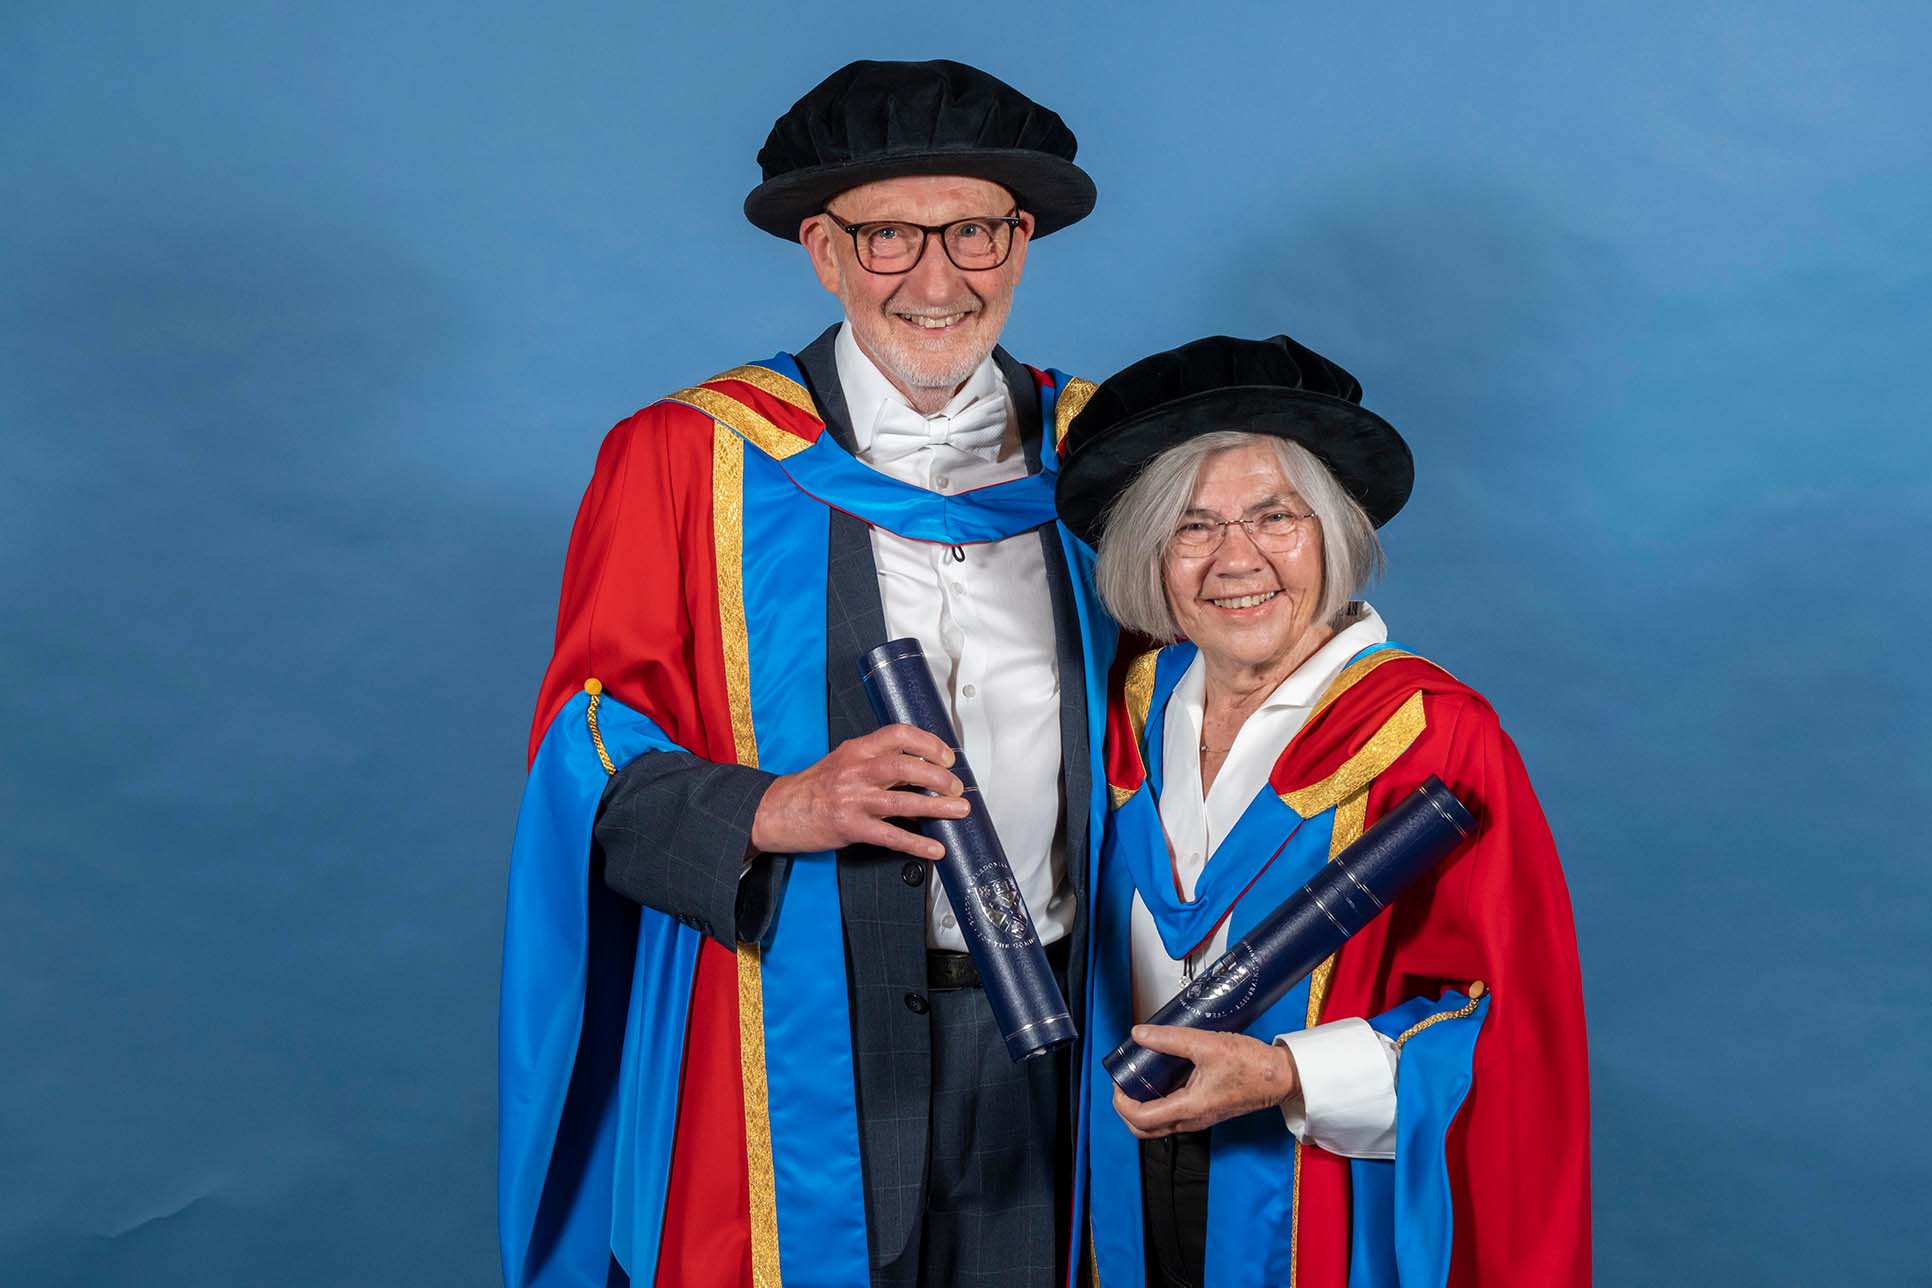 GCU Honorary Graduates Drs John and Senga Bond wearing their graduation hoods and hats and holding their degree containers.